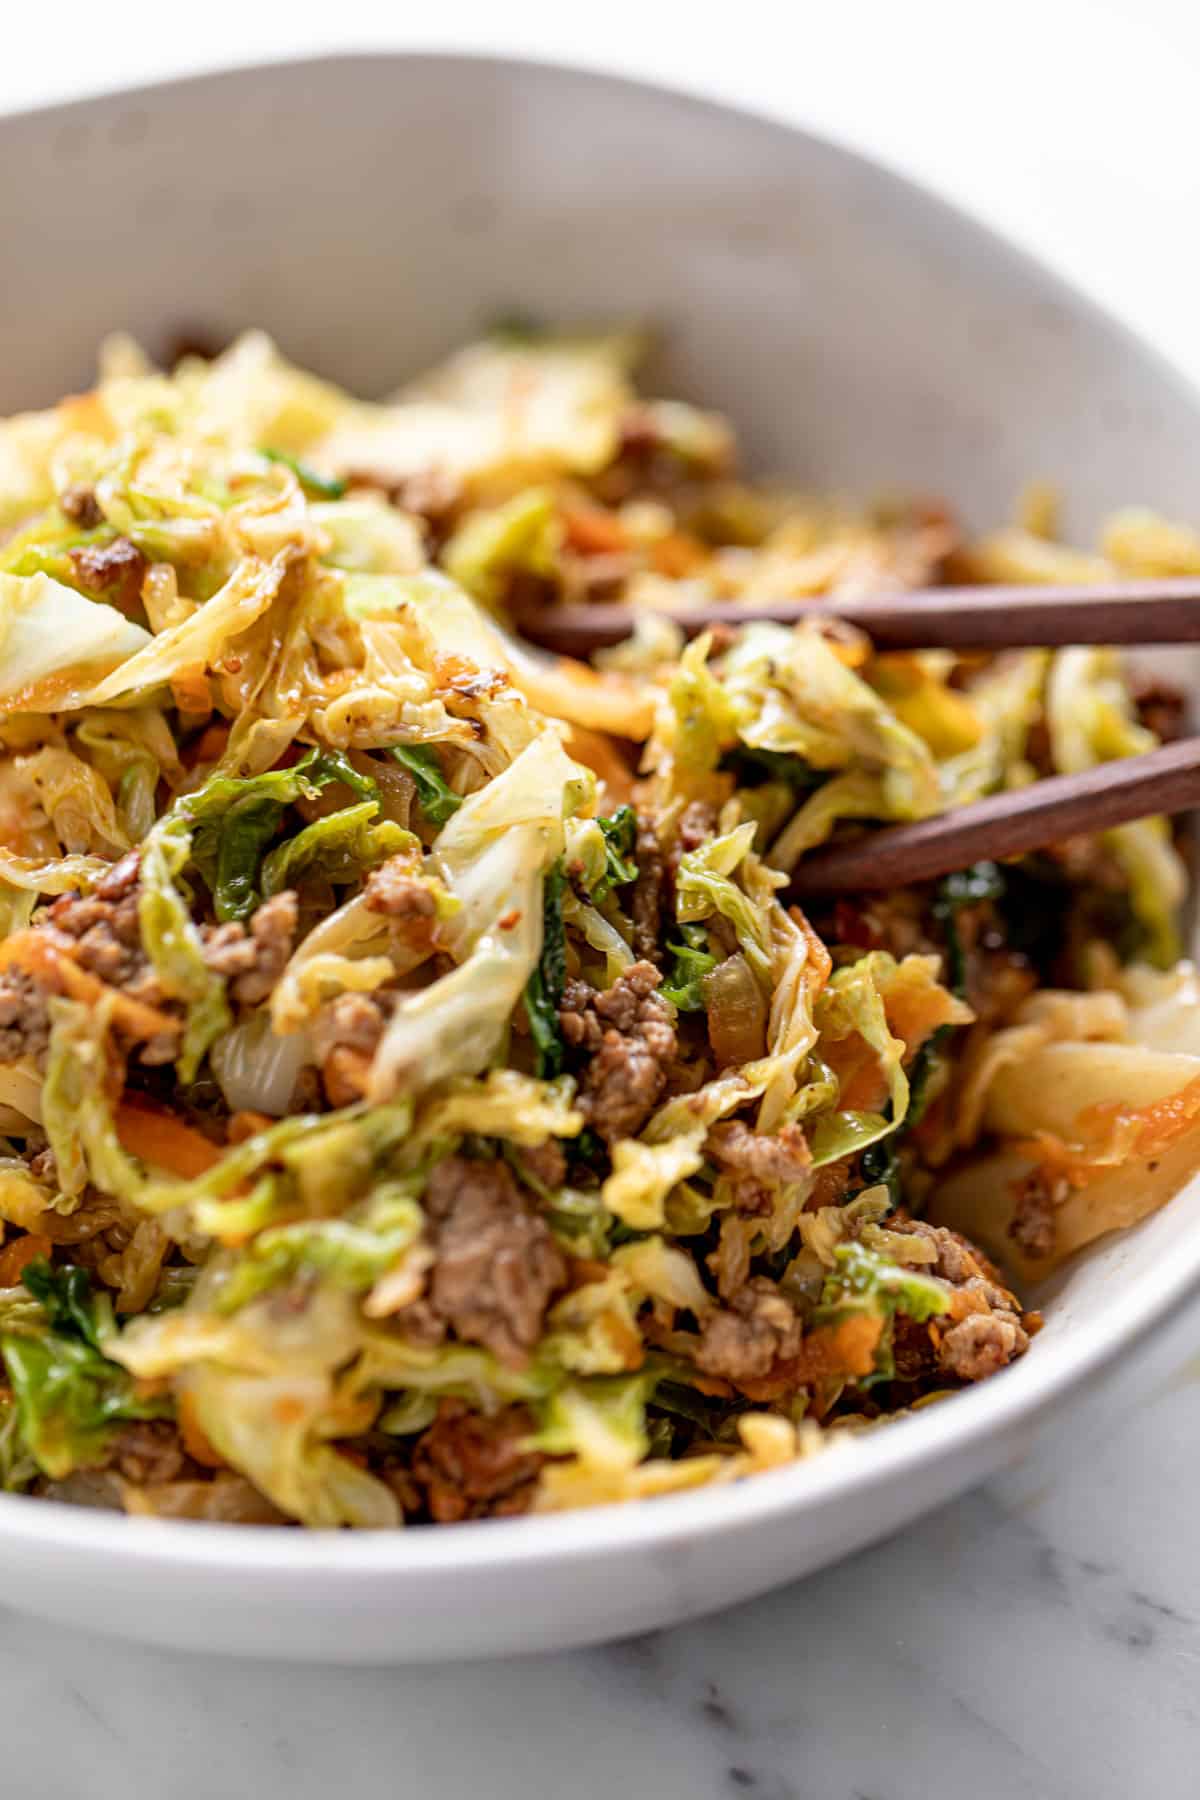 Ground Beef in a bowl with cabbage, served with chop sticks | cafedelites.com